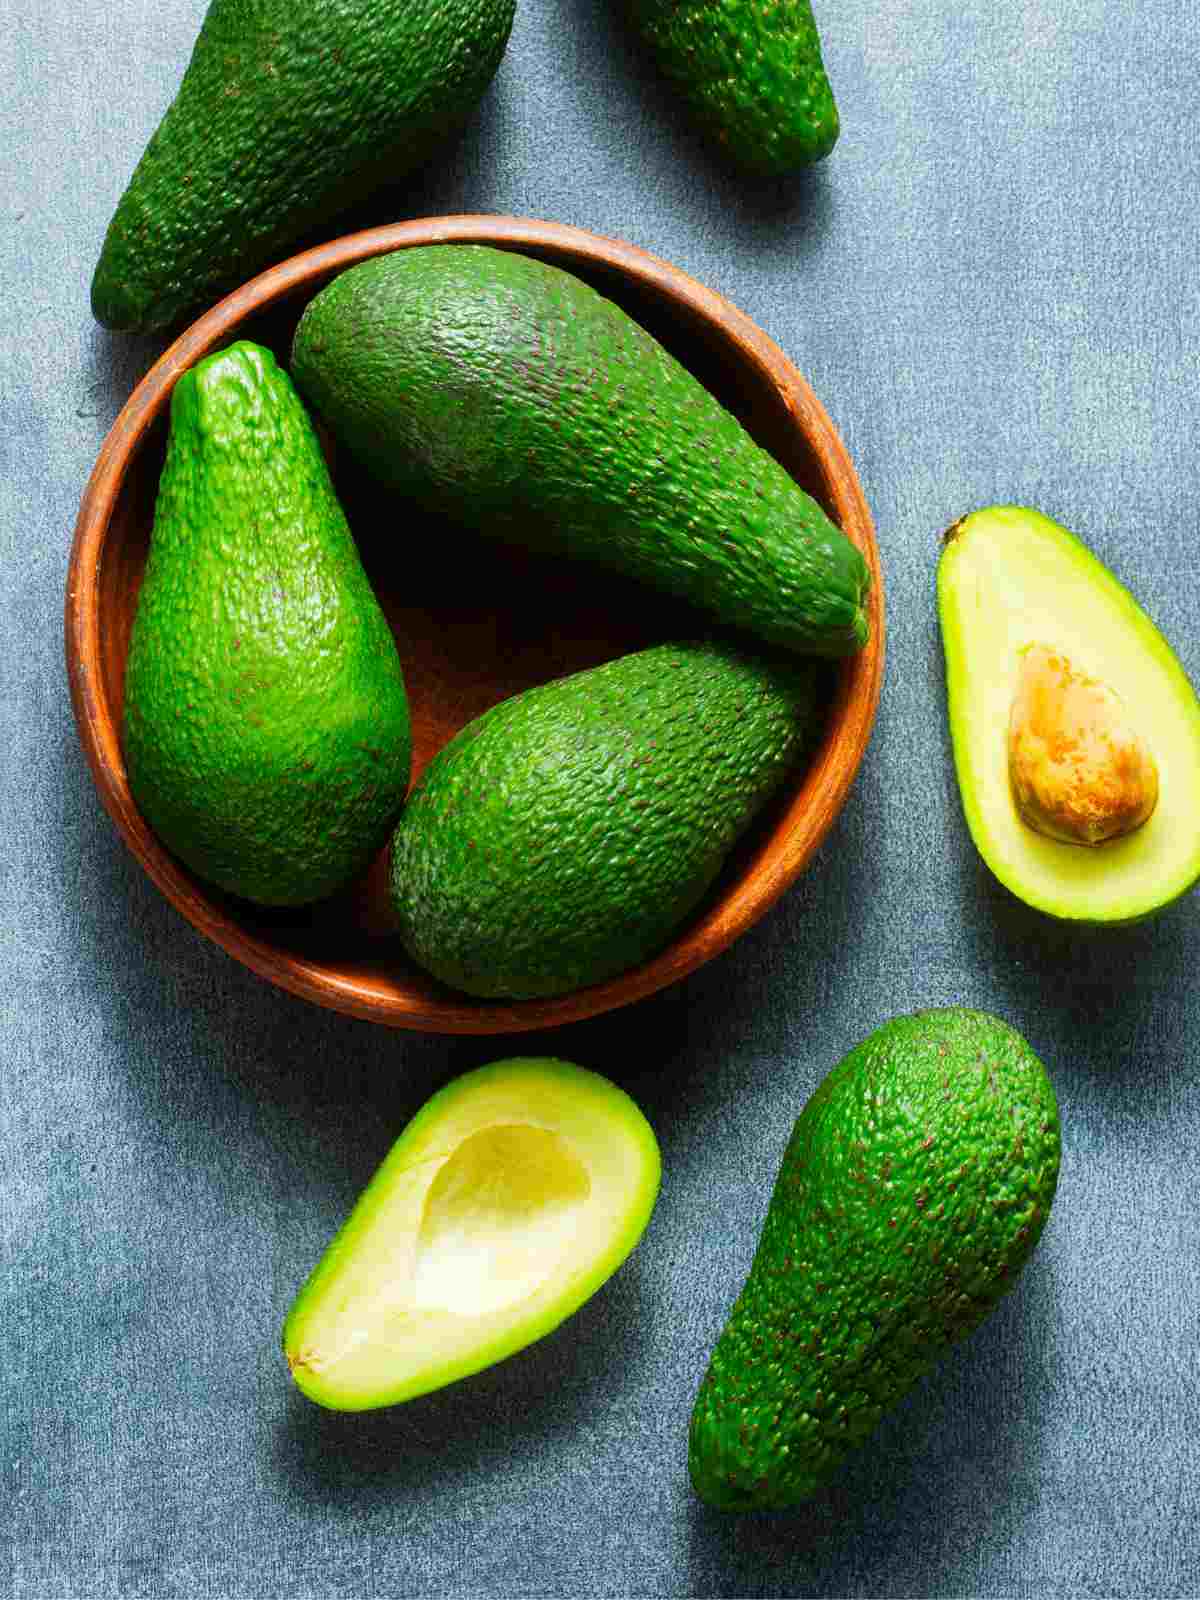 What Happens When You Eat Avocados Every Day